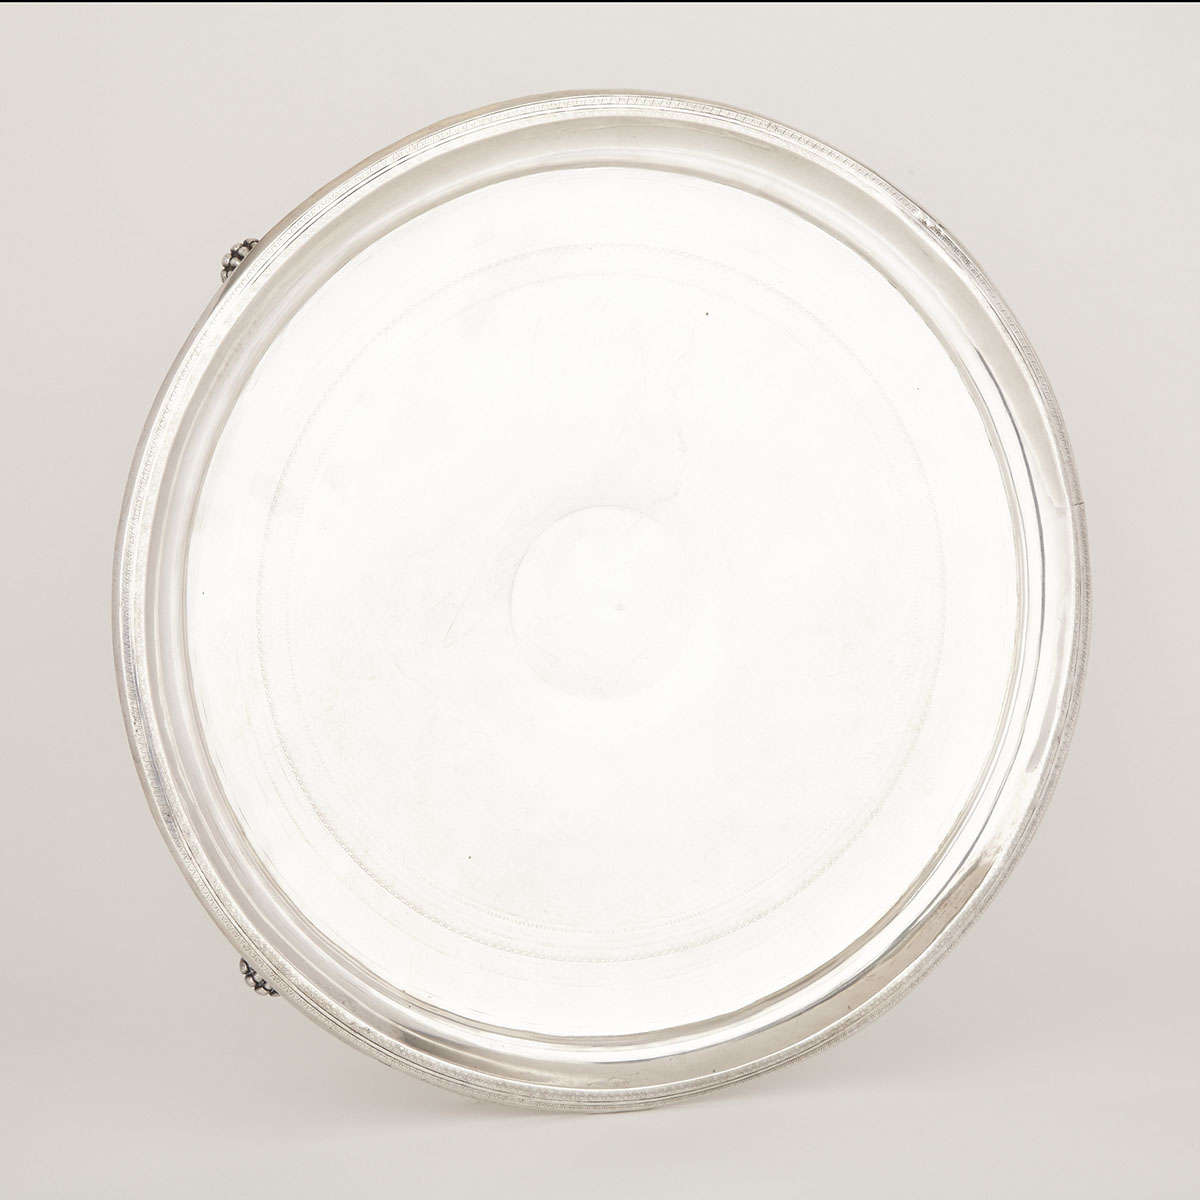 Colonial Silver Large Circular Salver, possibly Portuguese, 19th century